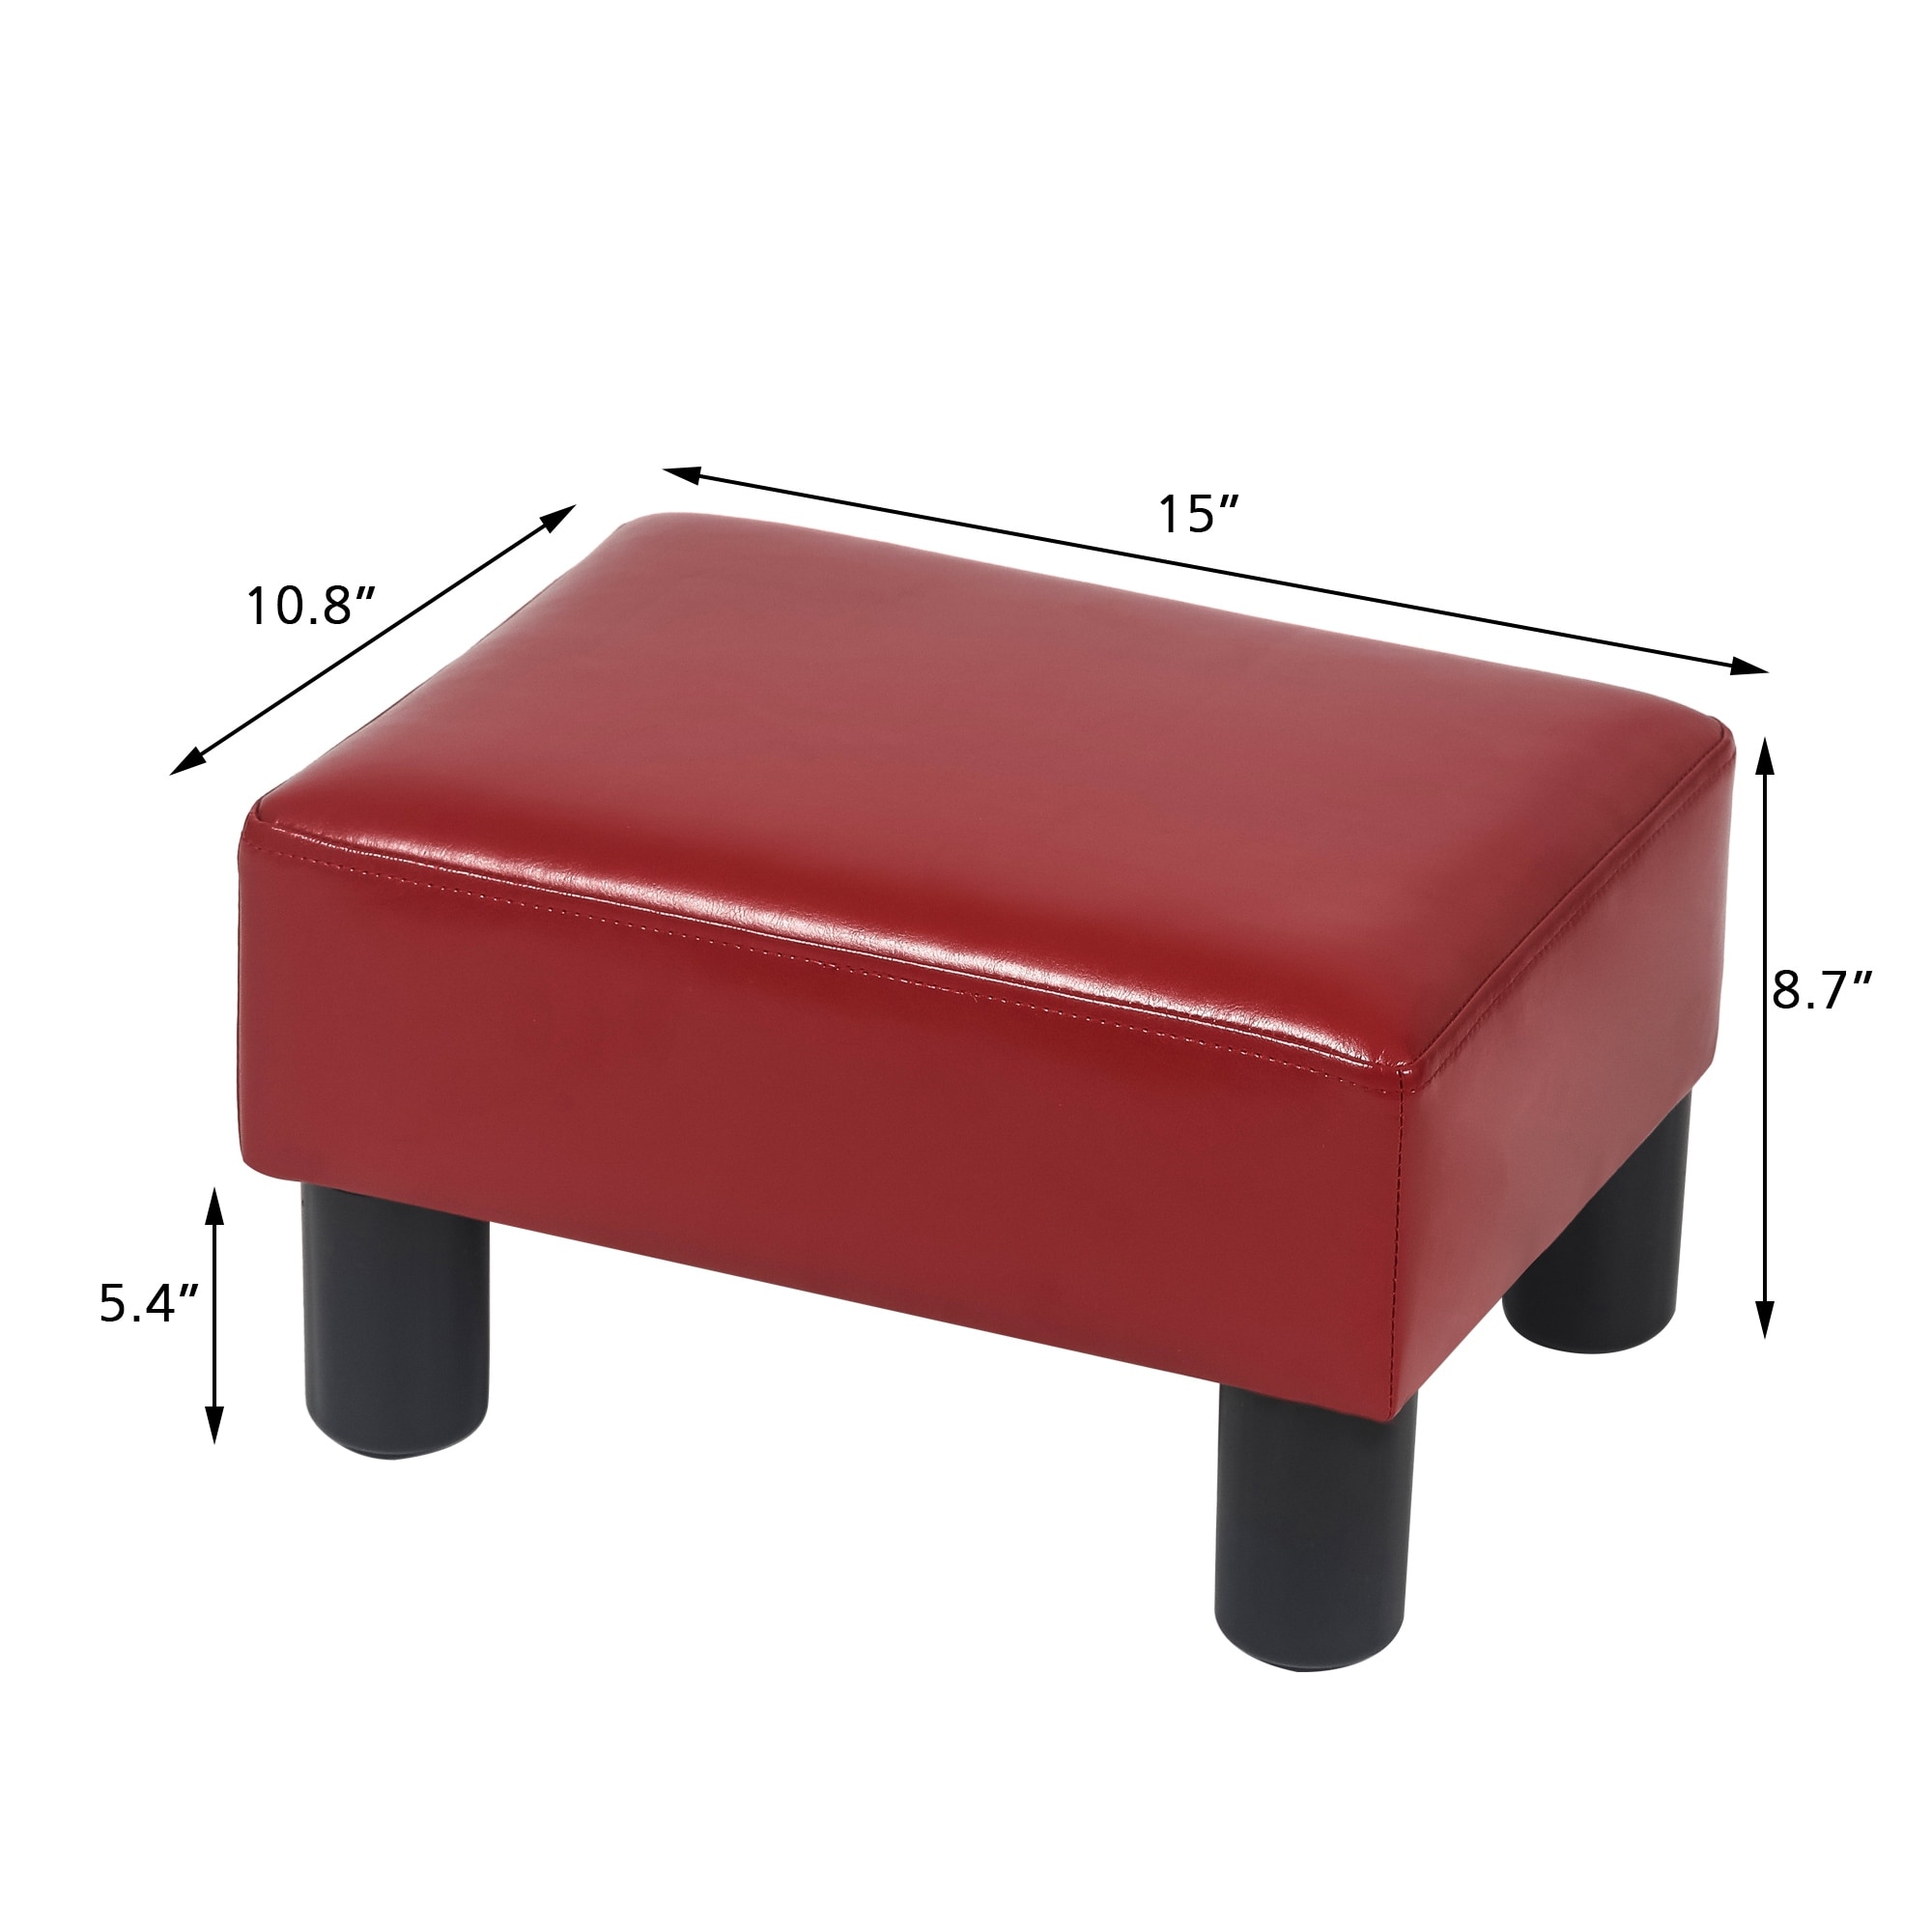 https://ak1.ostkcdn.com/images/products/is/images/direct/5e7e6ce76713bb37e3c66e57d5198b9c872efd57/Adeco-Small-Rectangular-Ottoman-Modern-PU-Leather-Footrest-Stool-Chair.jpg